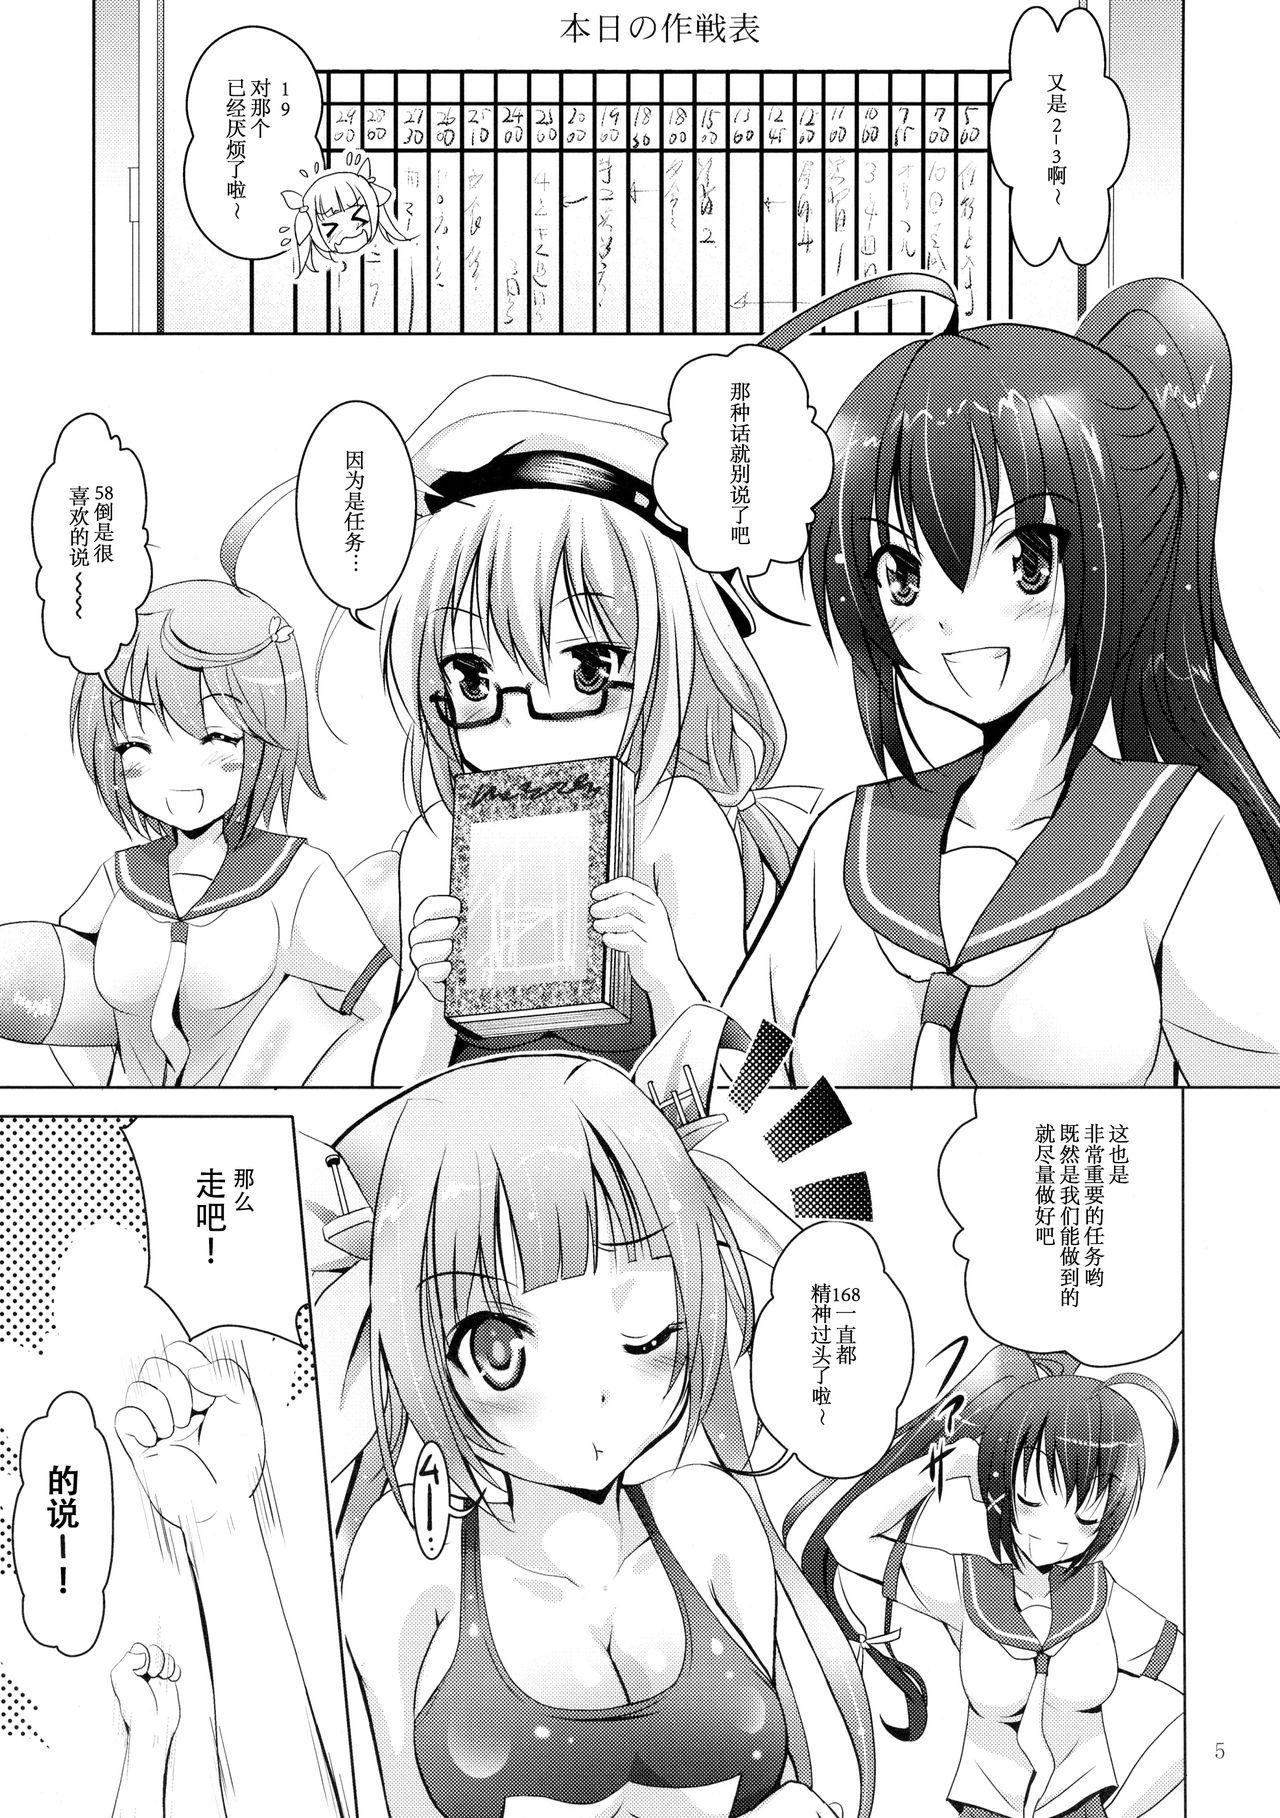 Raw Mousou Mini Theater 34 - Kantai collection Femdom Clips - Page 5